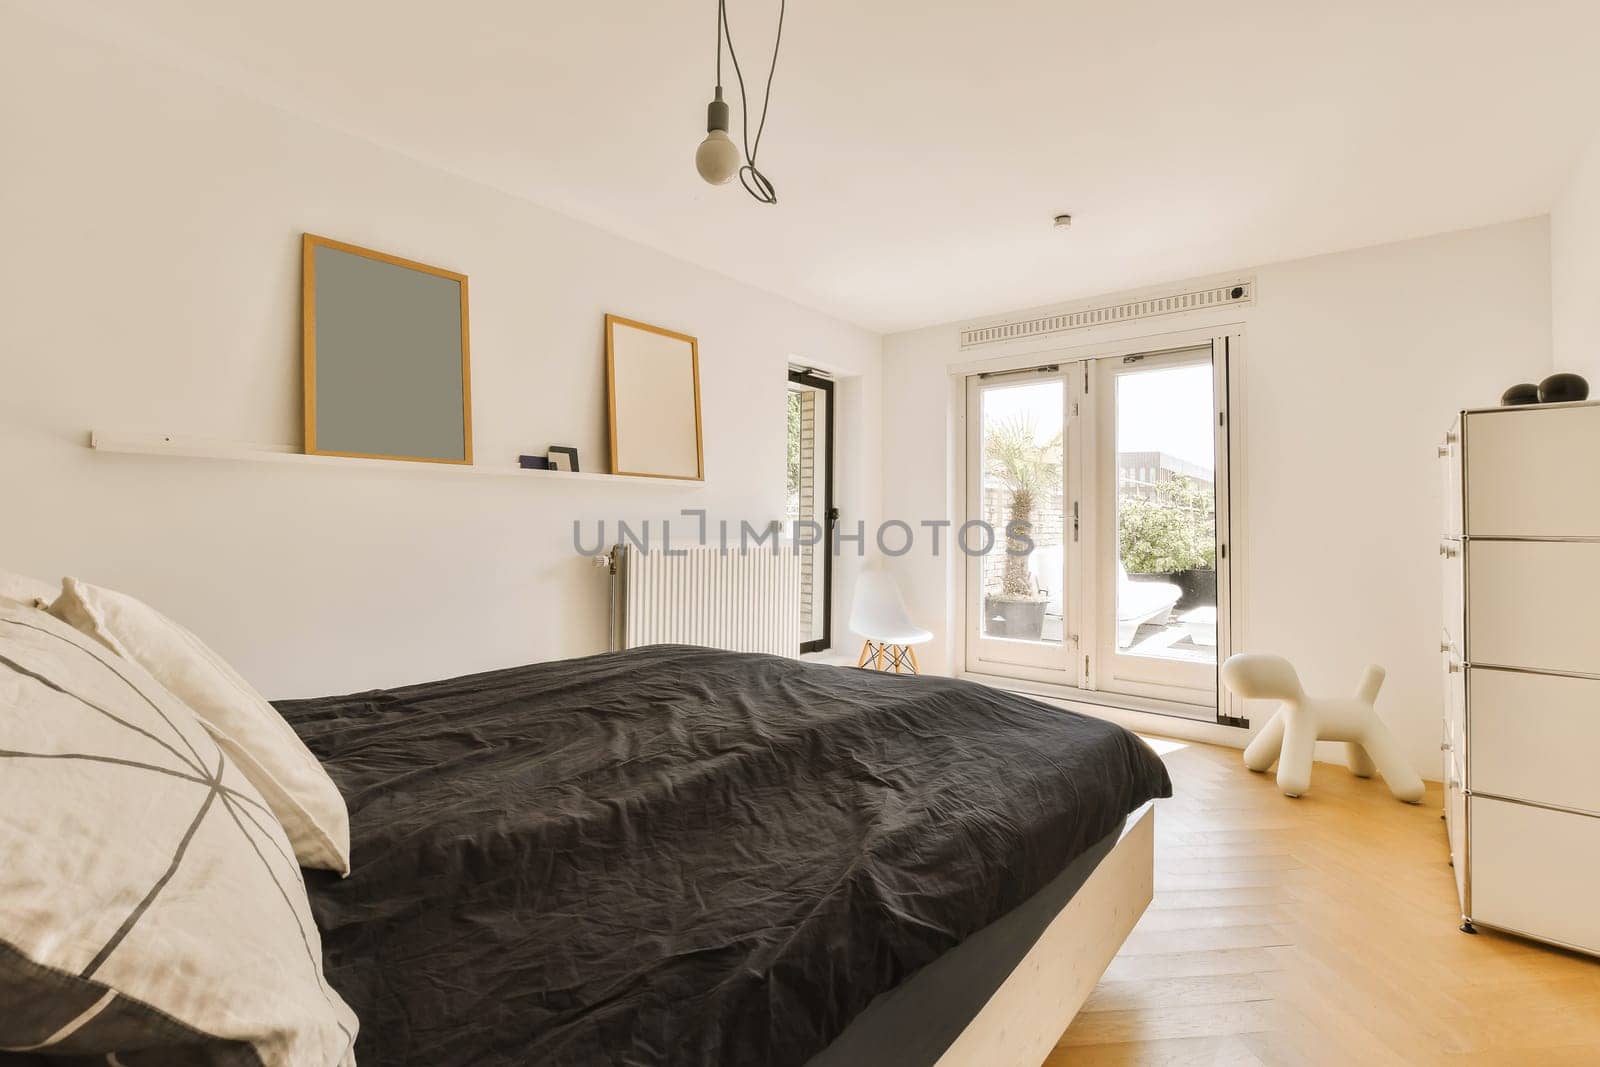 a bedroom with white walls and wood flooring in the fore - image was taken from an insic window